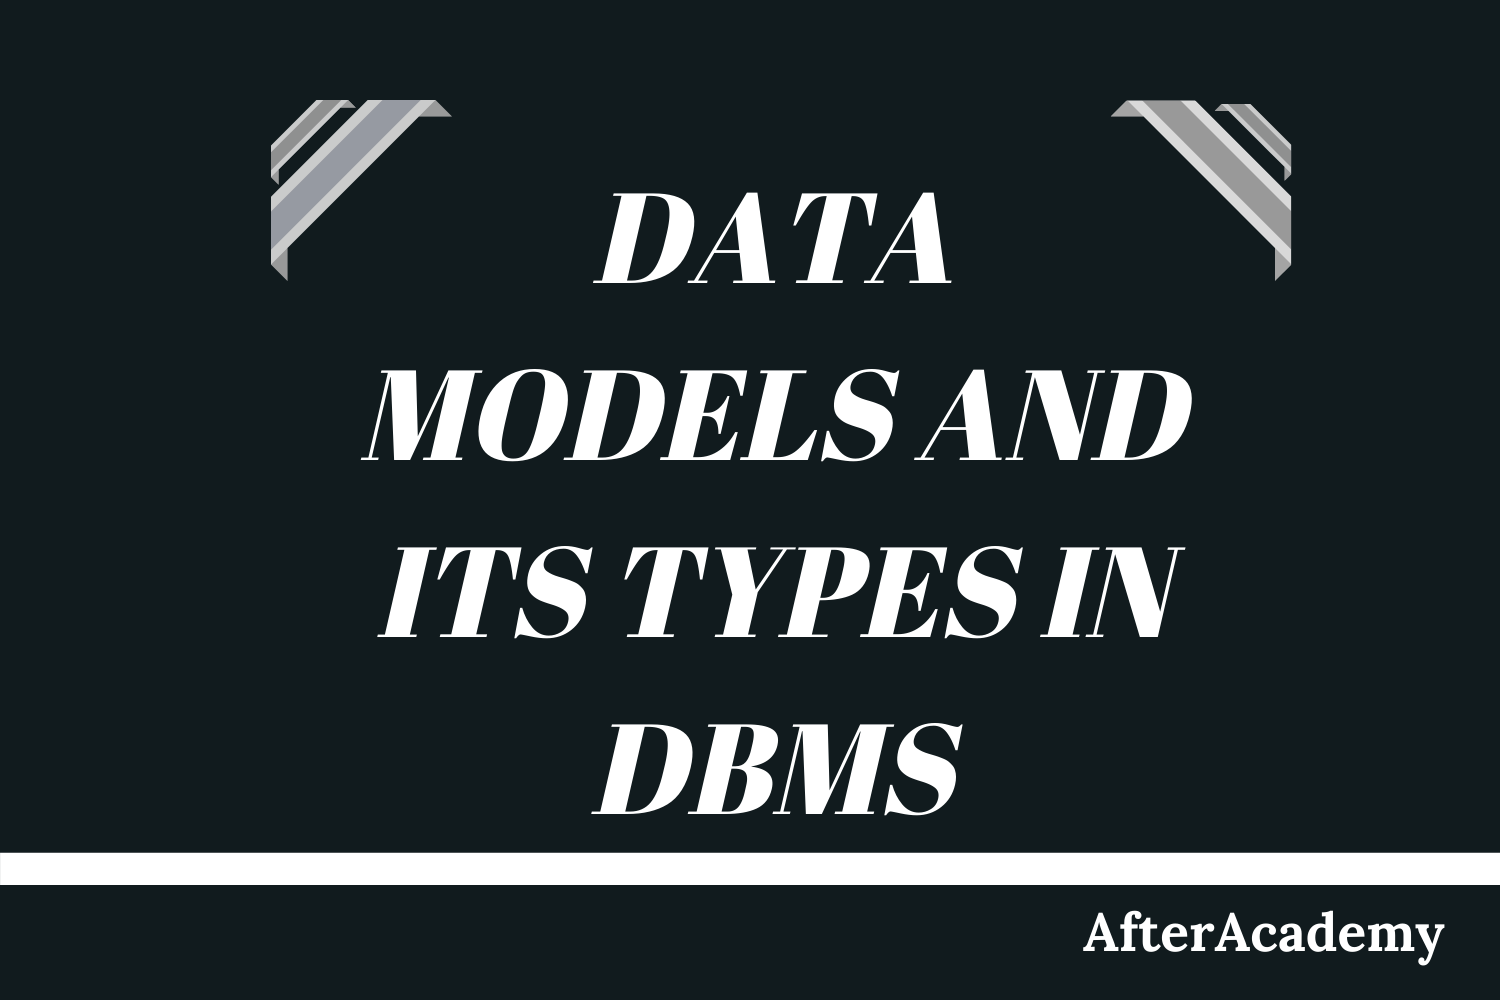 What is Data Model in DBMS and what are its types?